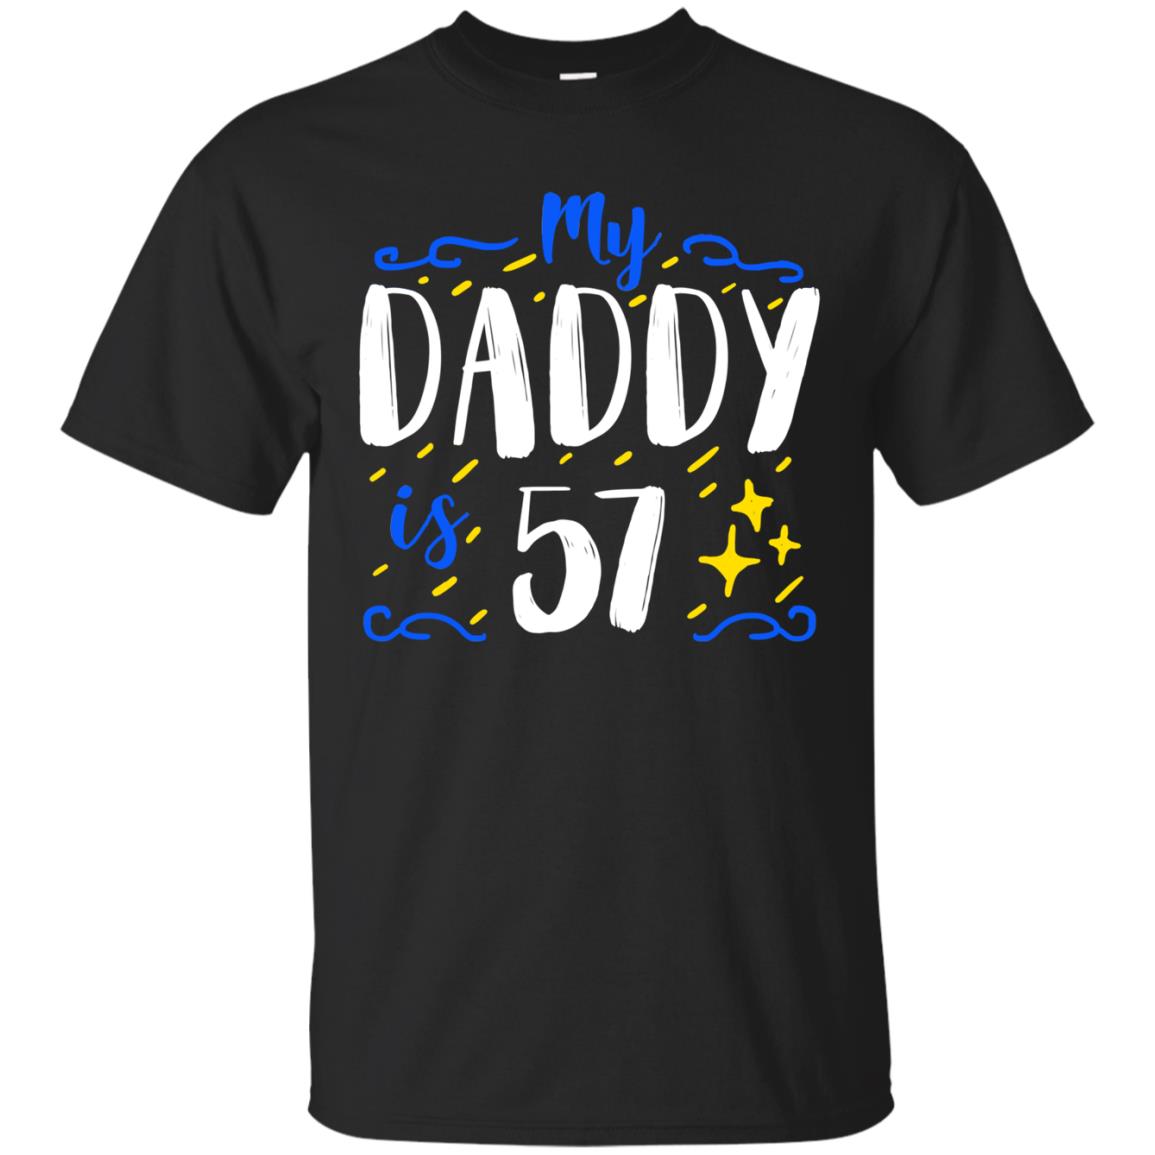 My Daddy Is 57 57th Birthday Daddy Shirt For Sons Or DaughtersG200 Gildan Ultra Cotton T-Shirt